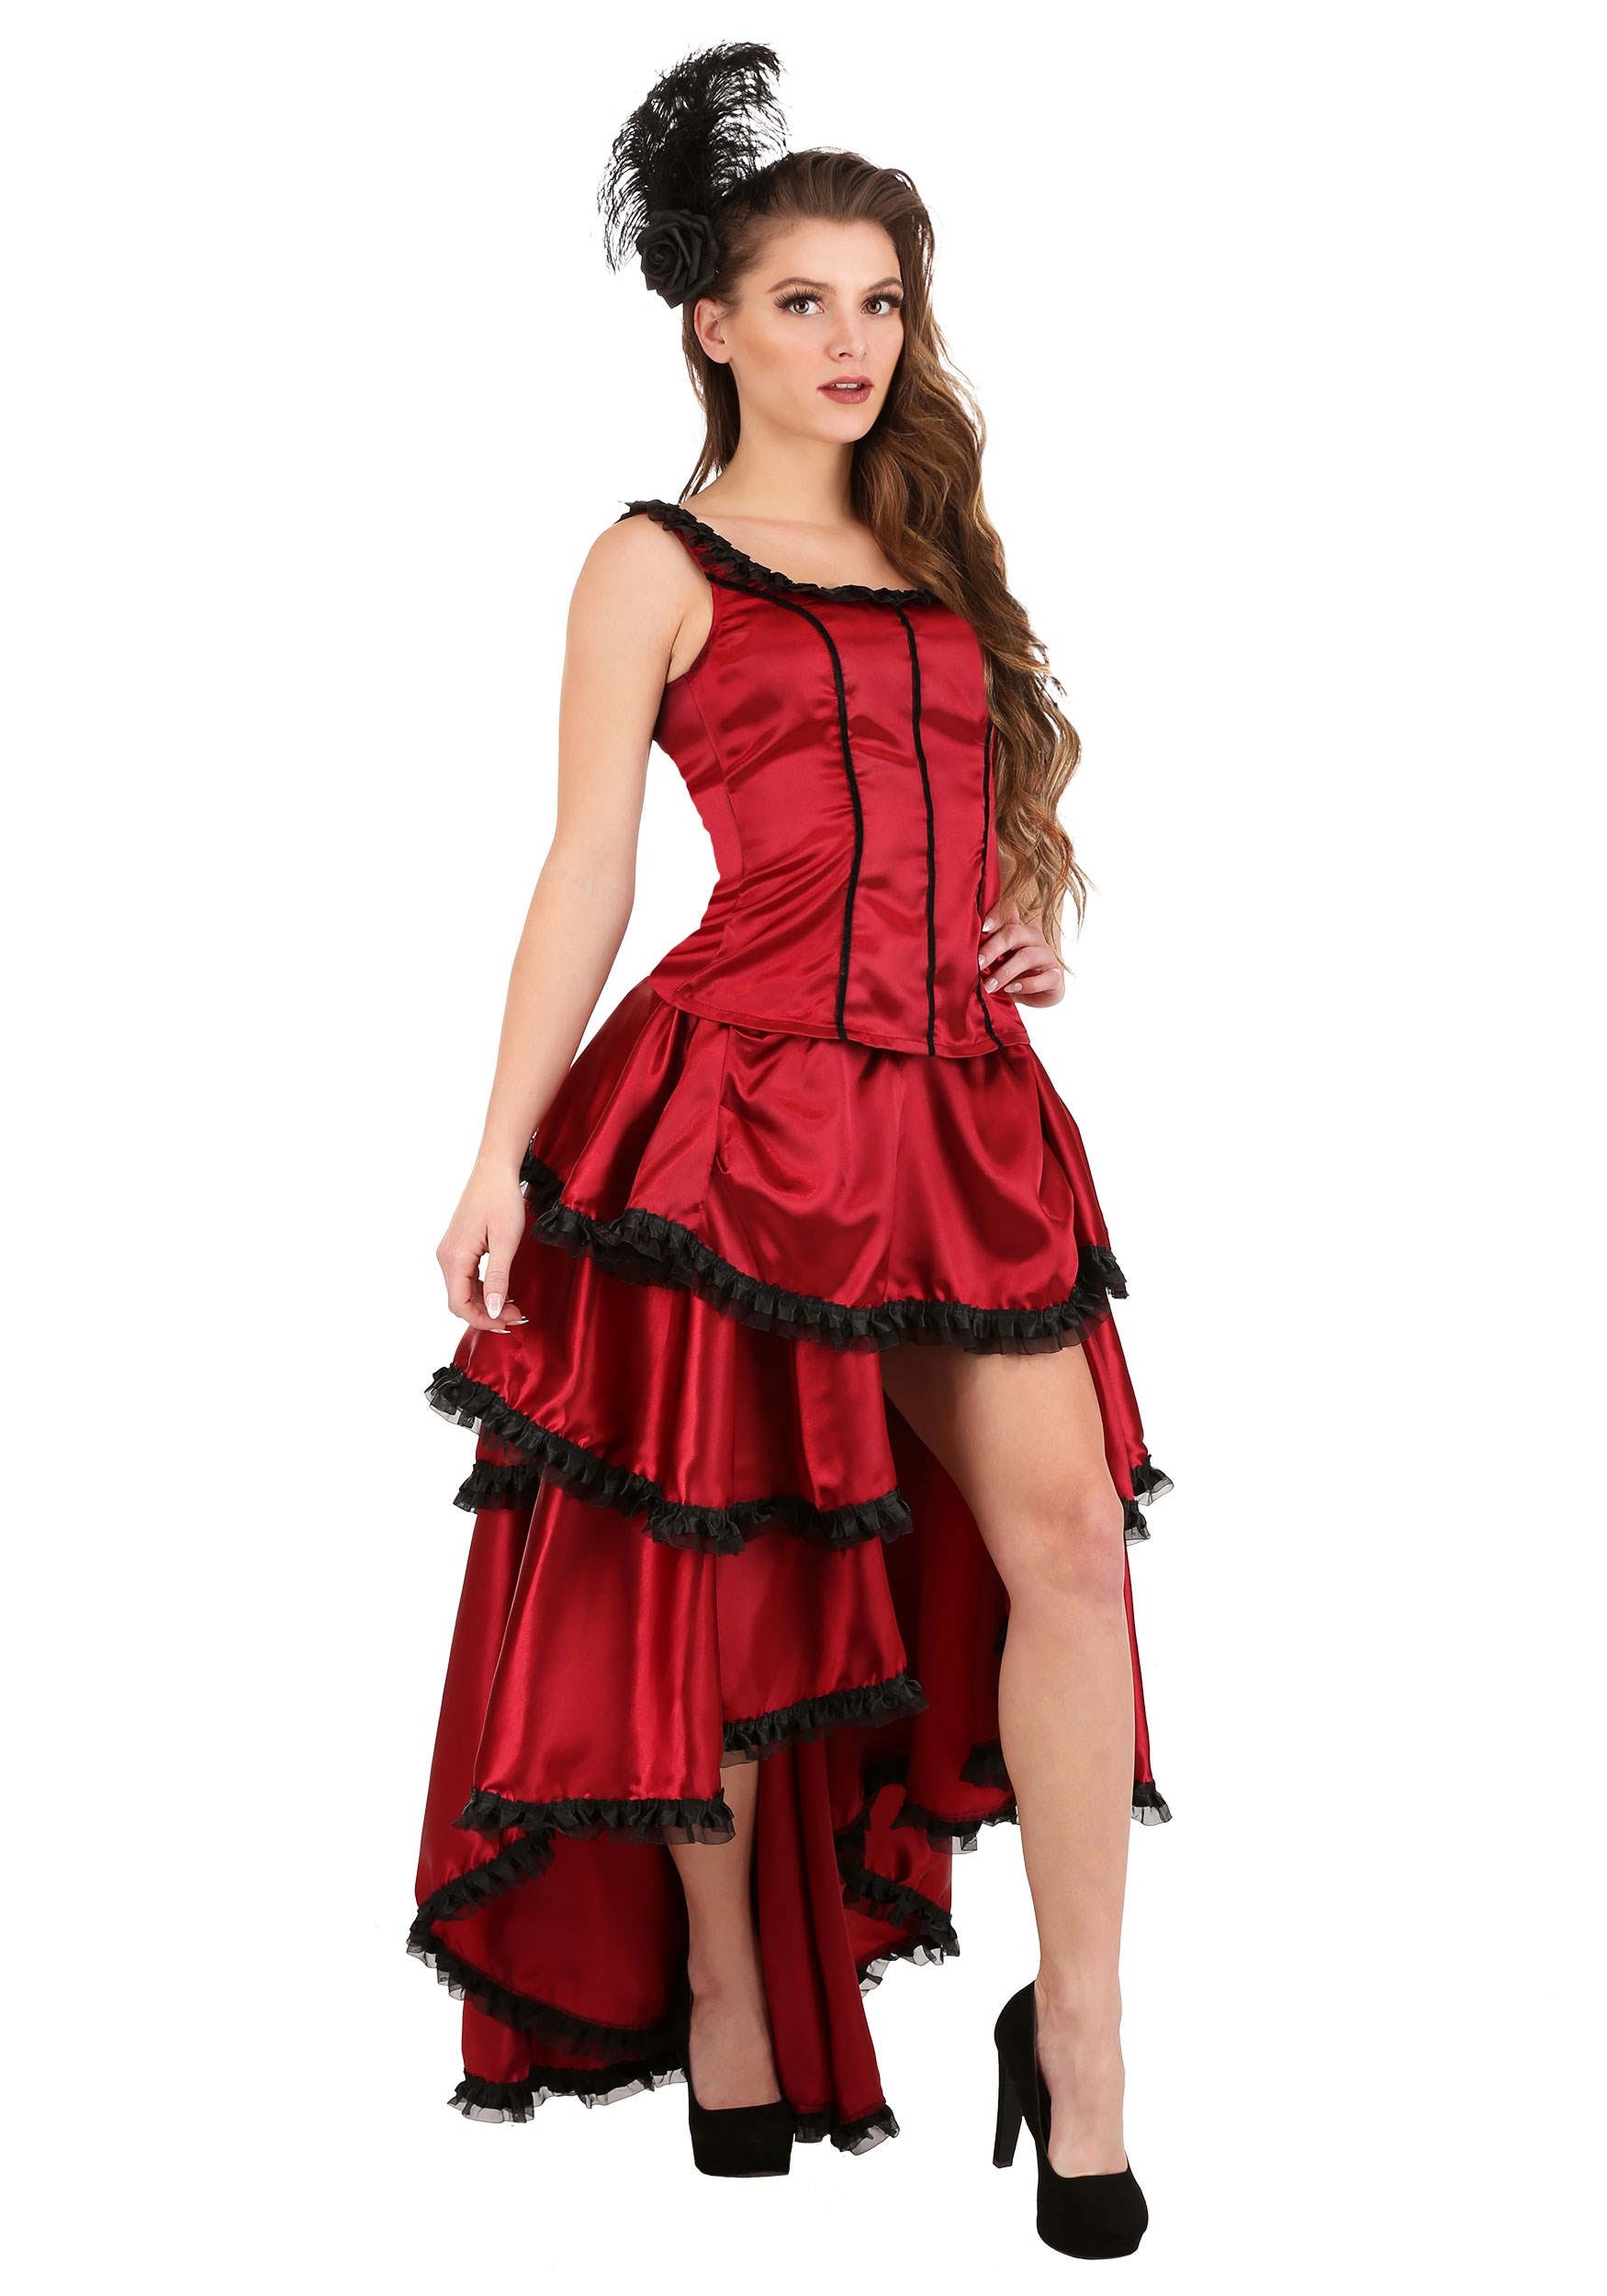 Sultry Saloon Girl Women's Costume